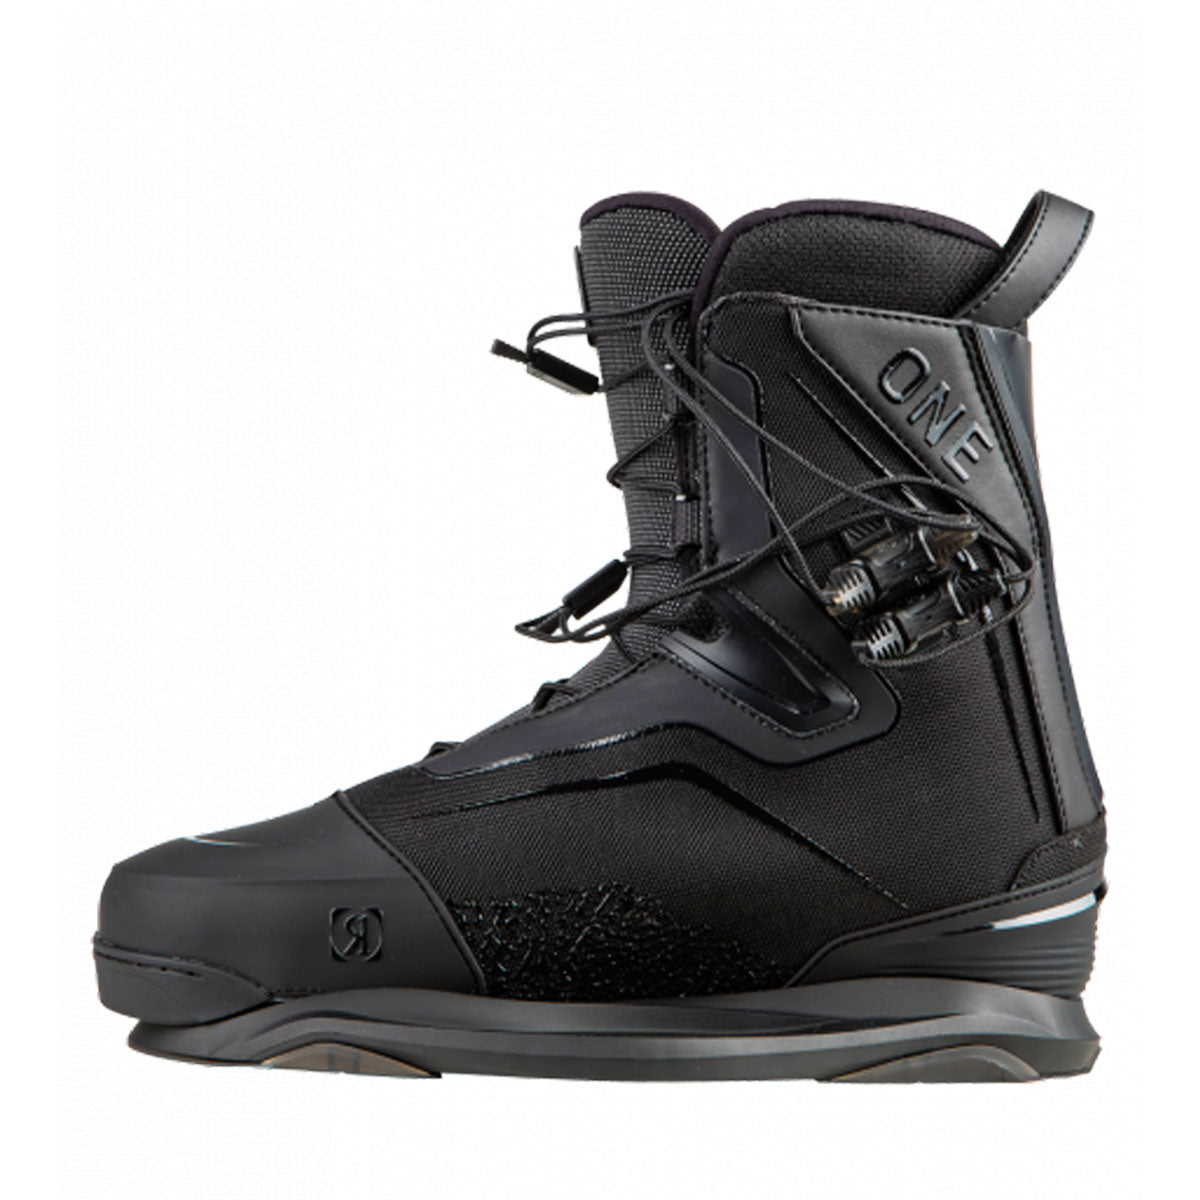 Ronix 2020 One Boots - Black